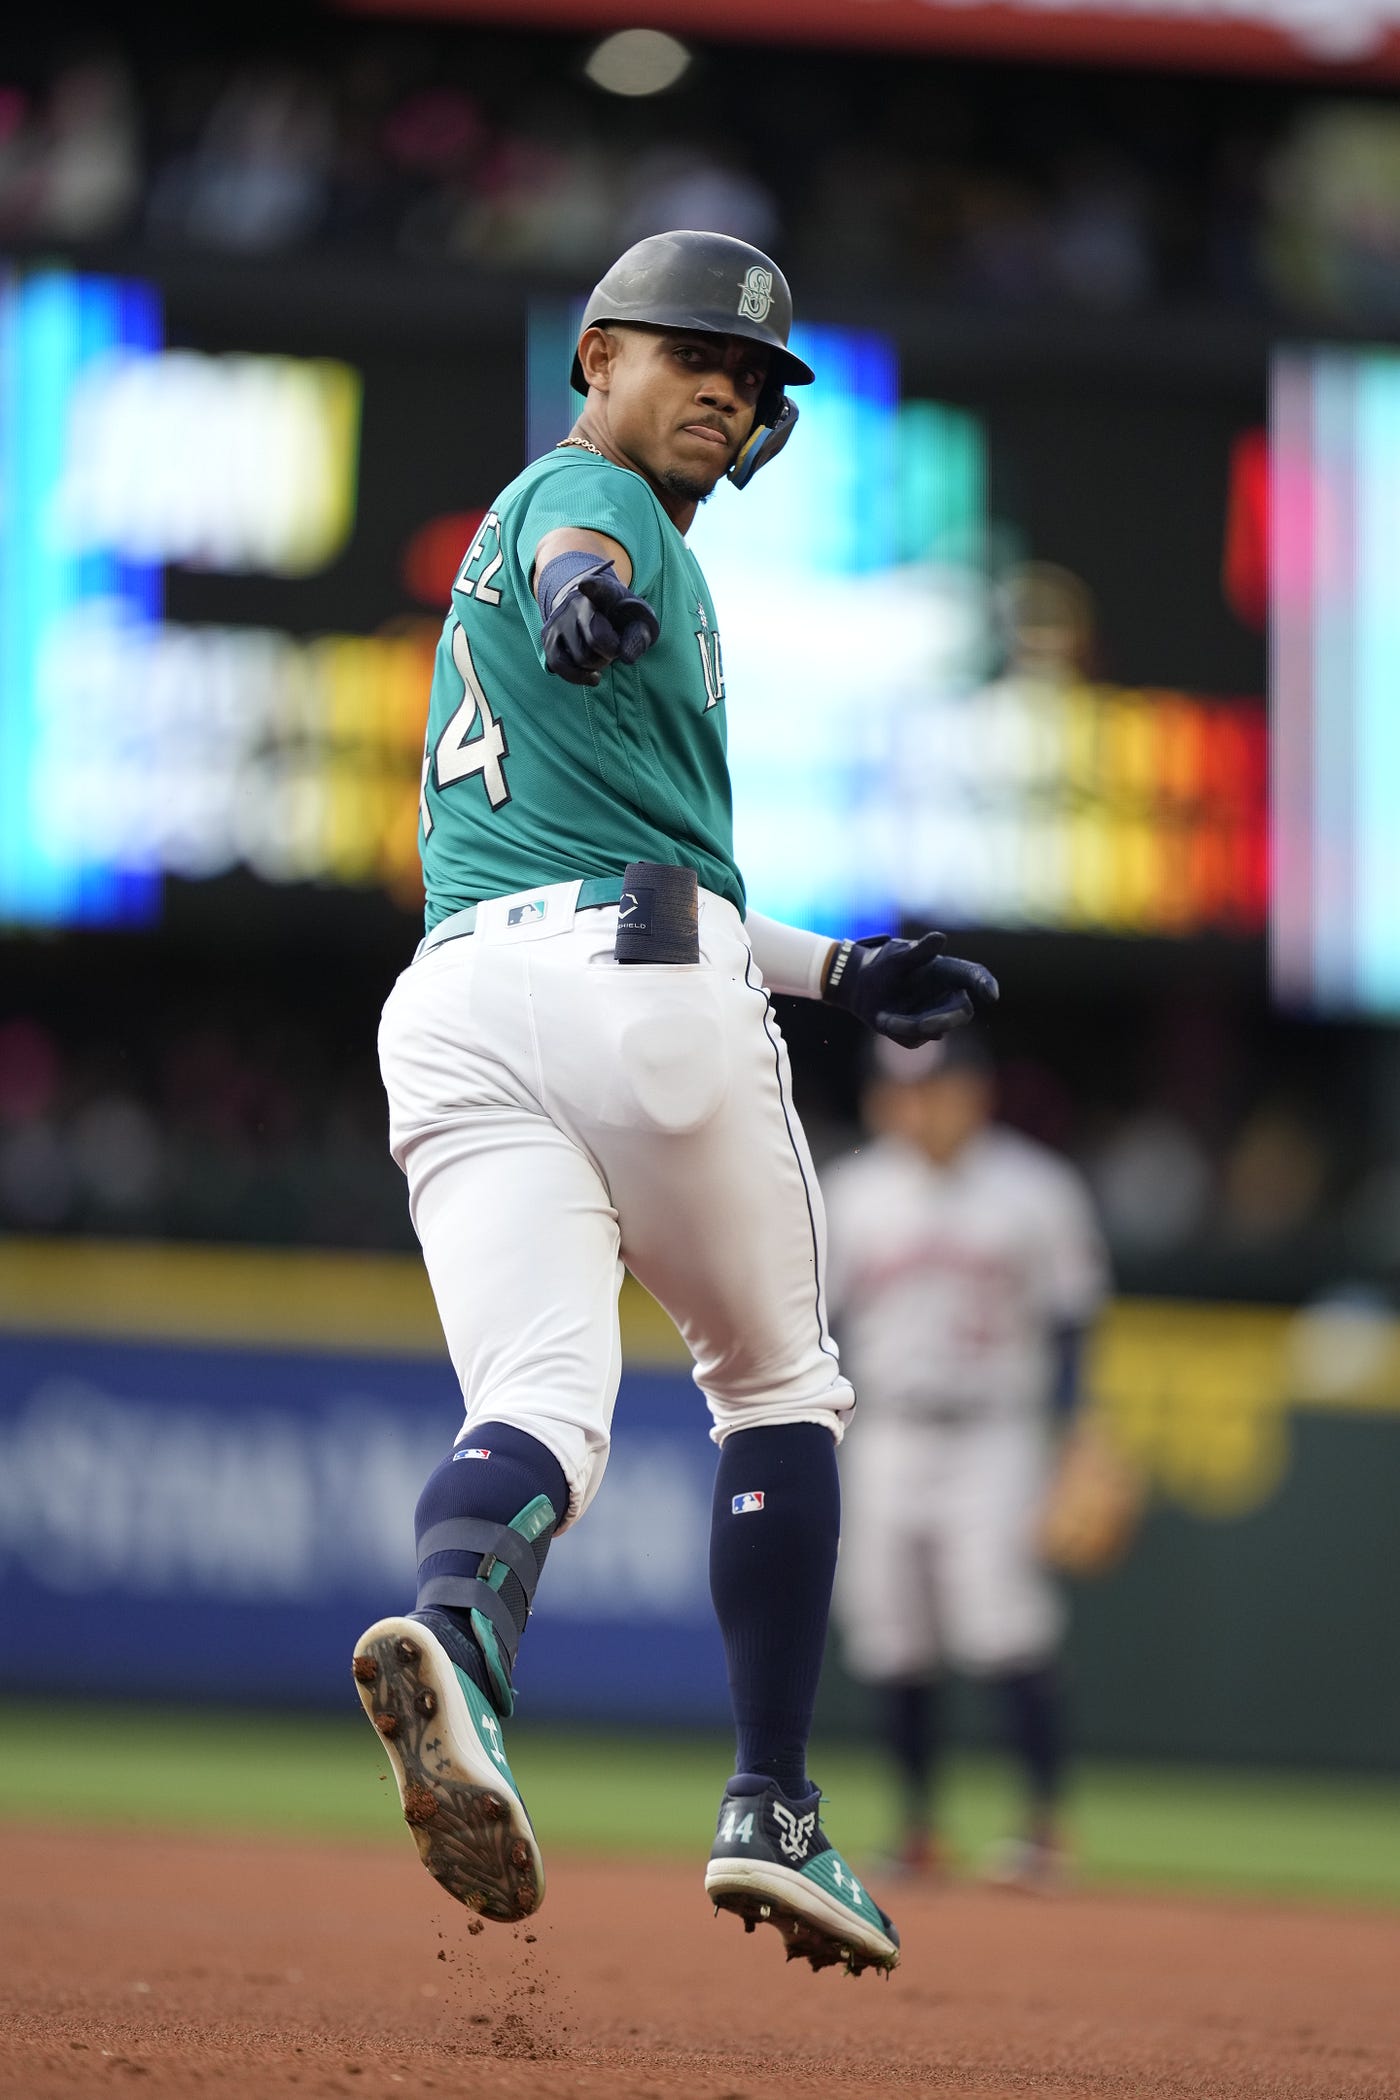 Mariners CF Julio Rodríguez named AL Rookie of the Month for May